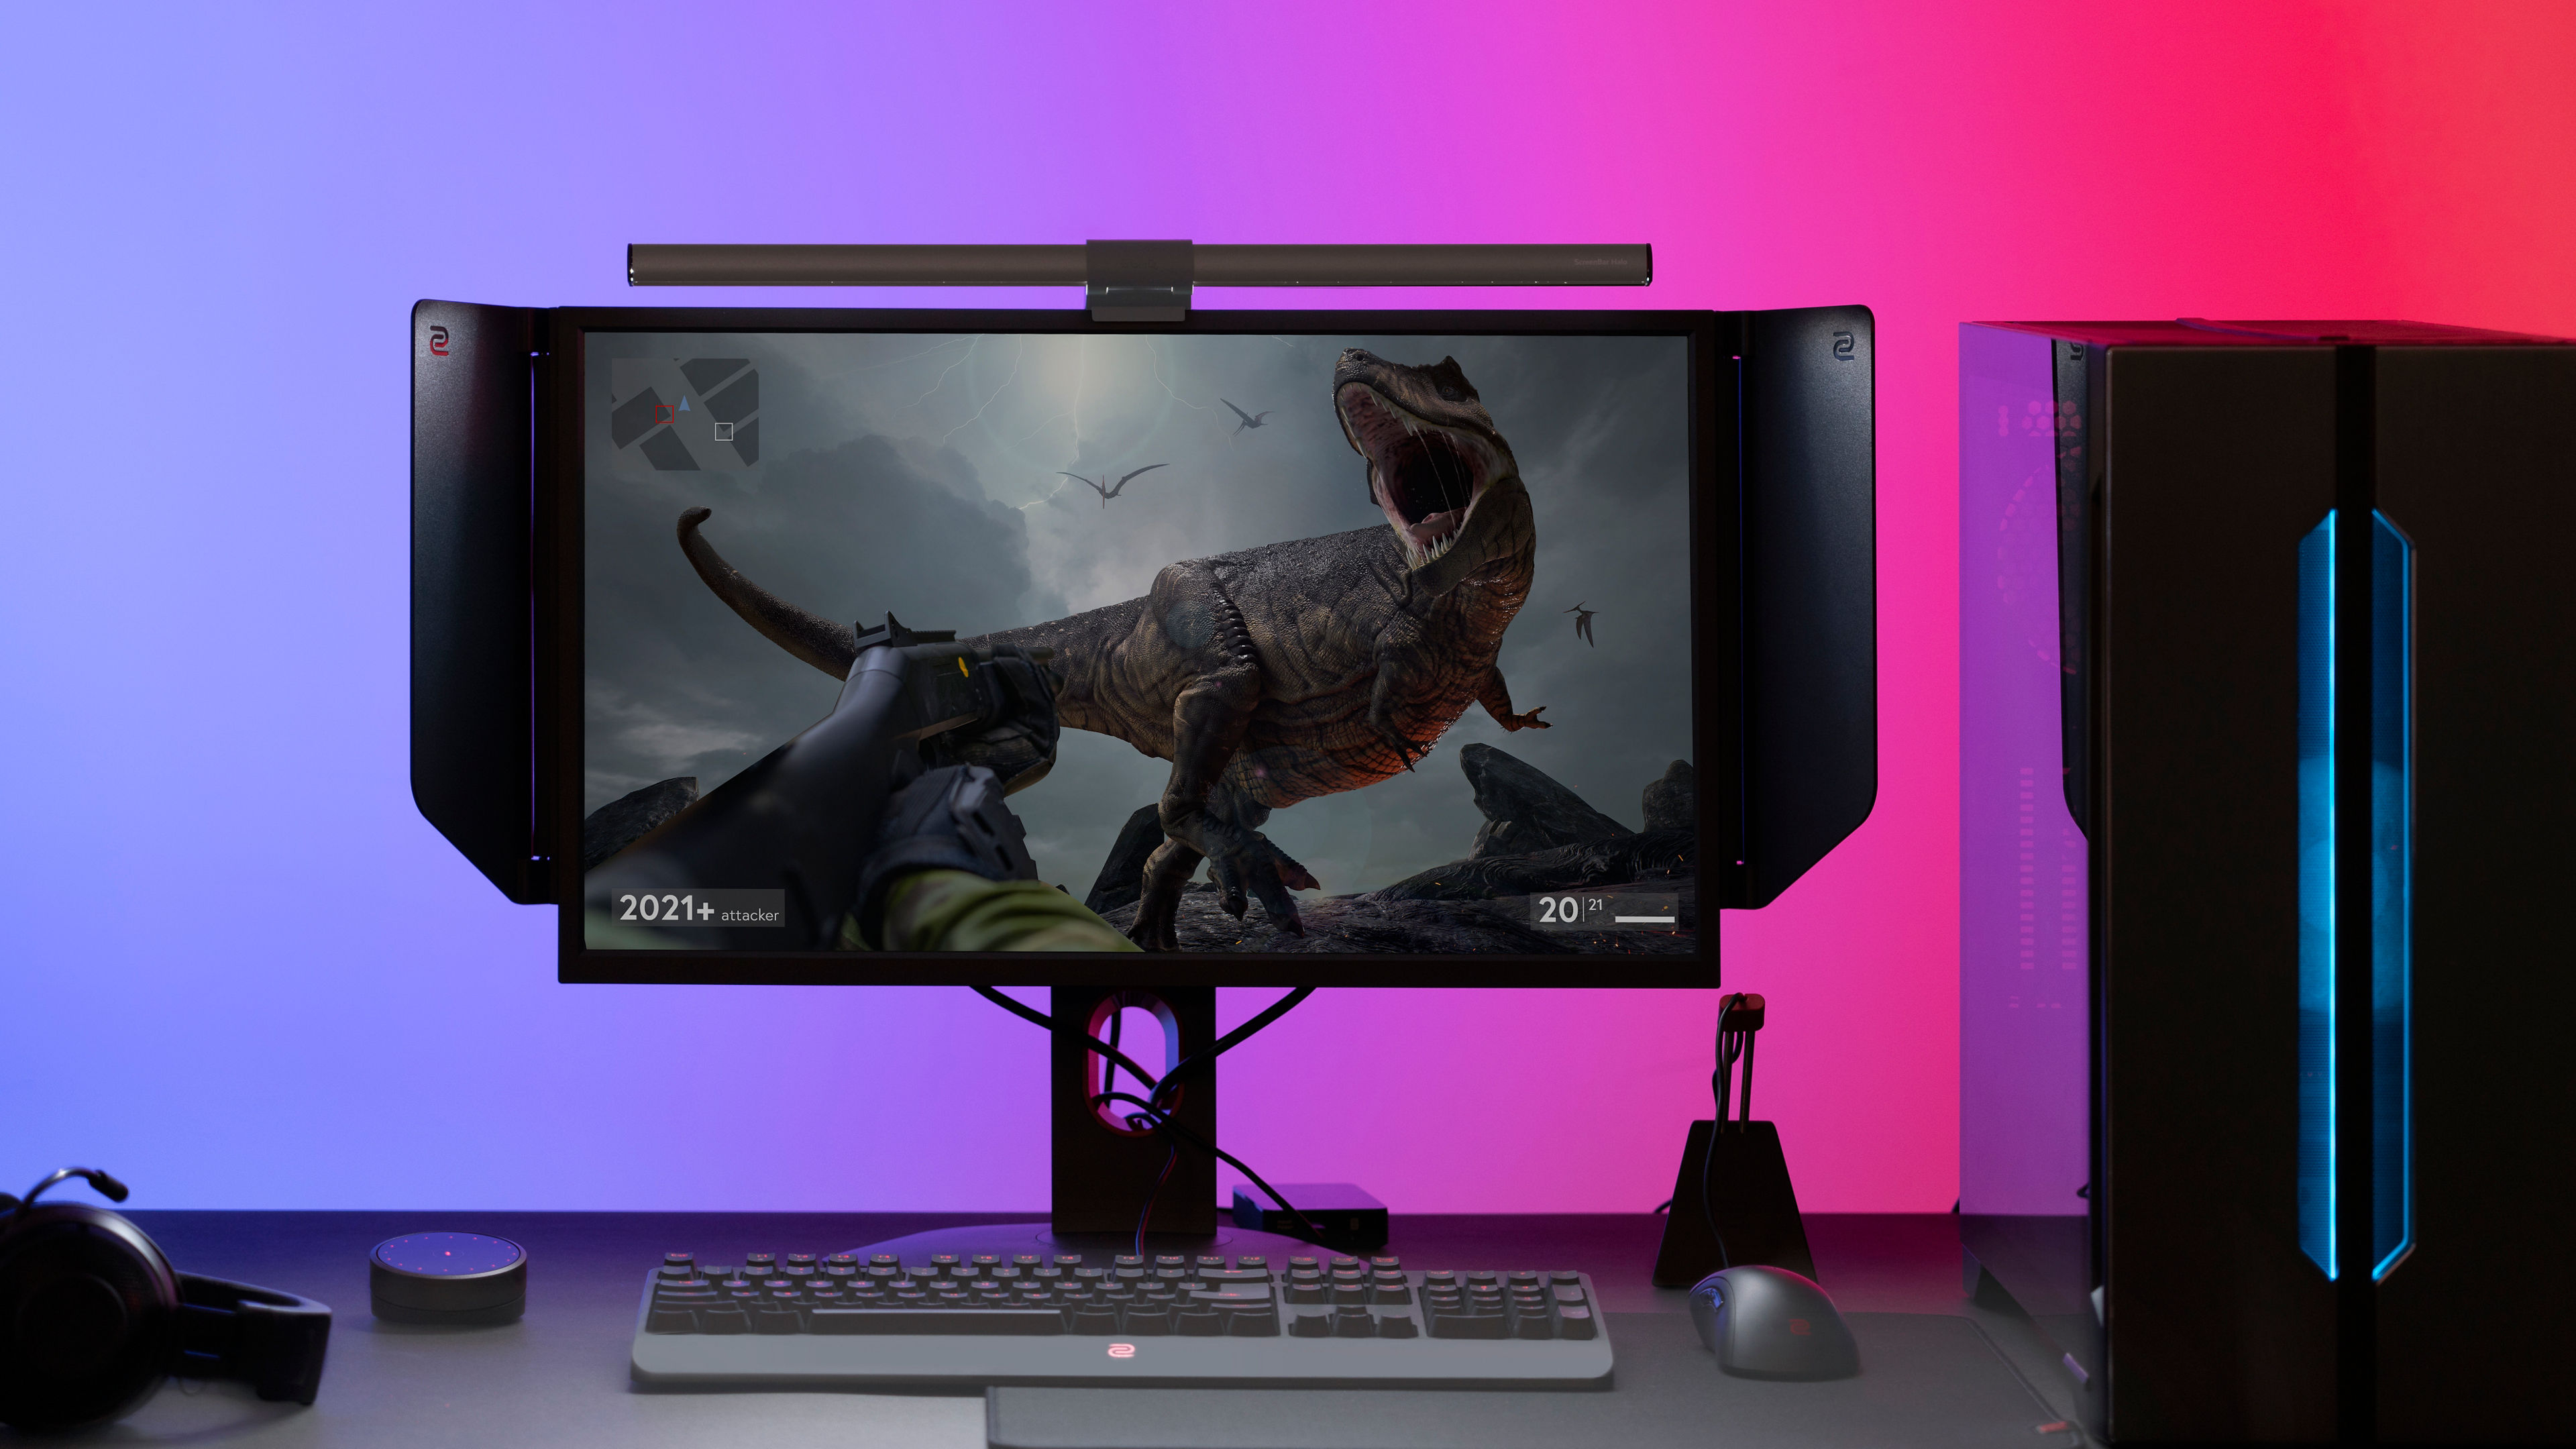 10 must-have accessories for PC gaming